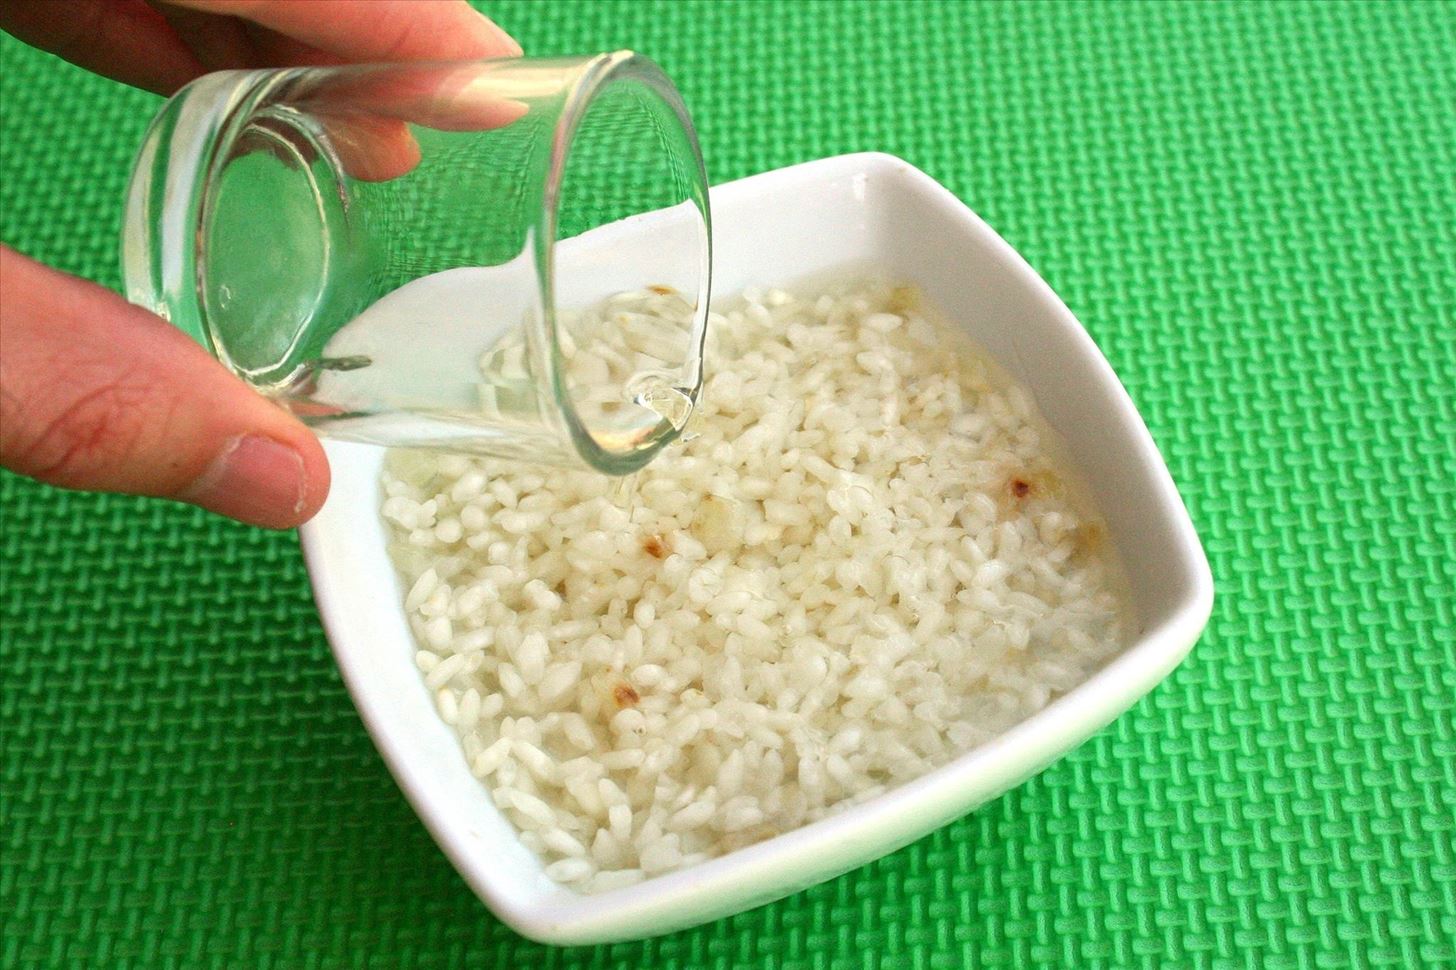 How to Make Fast, Easy Single-Serve Risotto in the Microwave